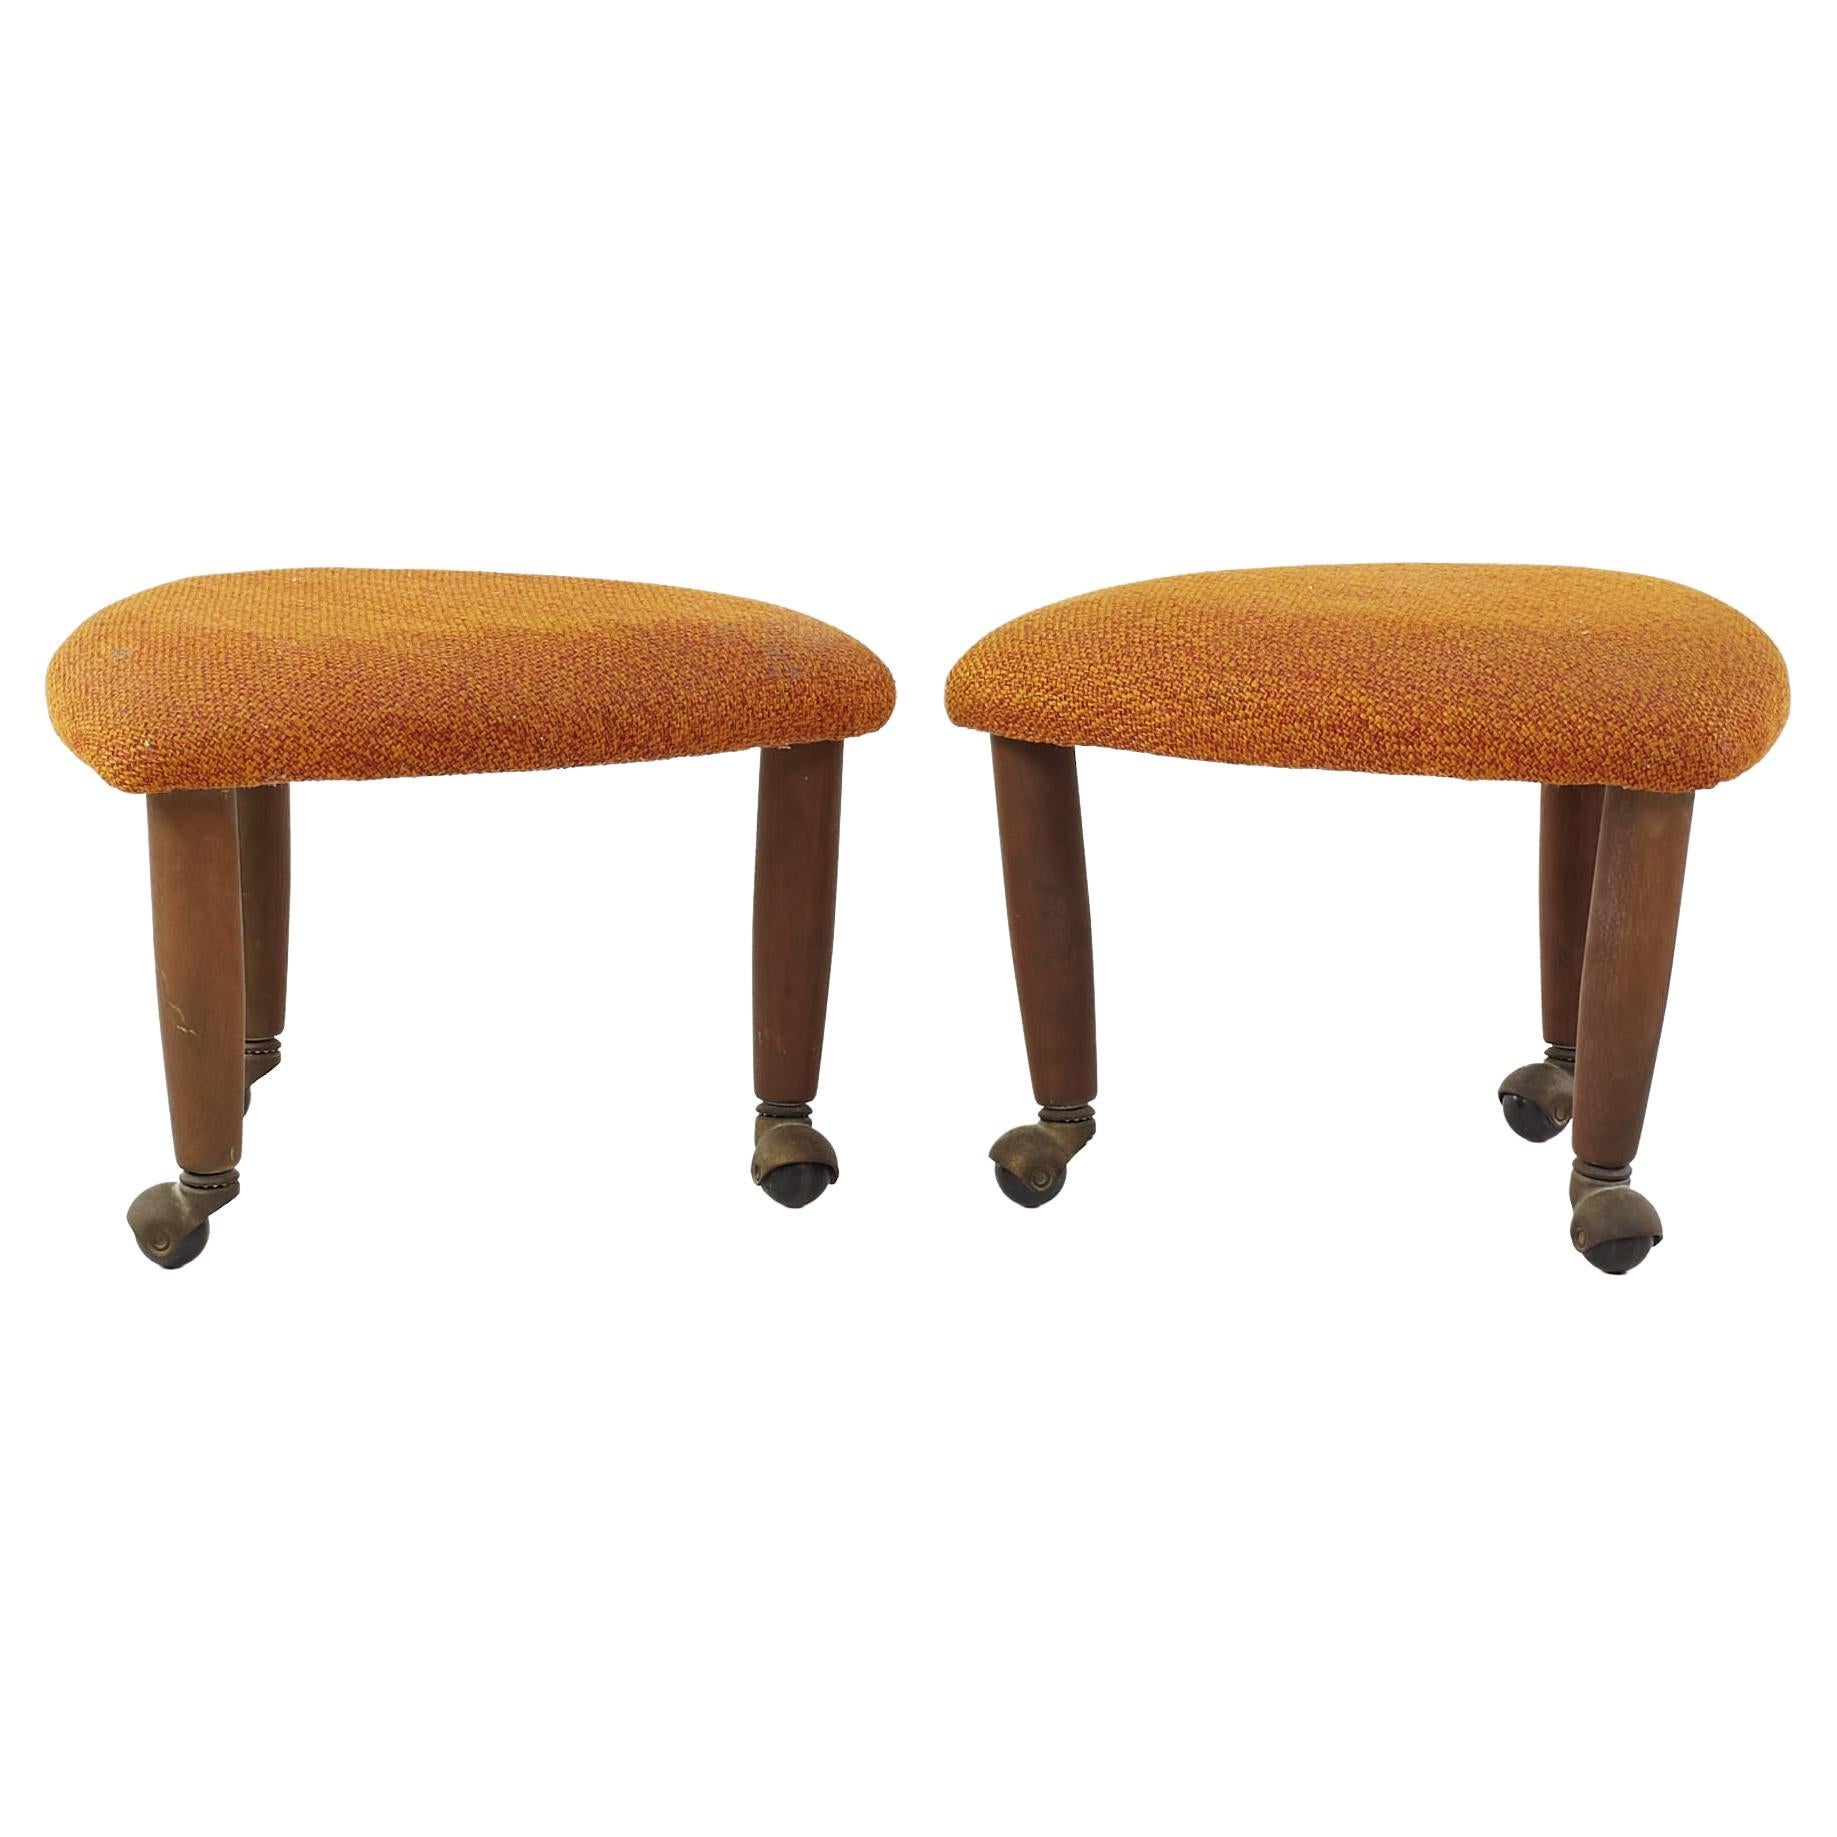 Adrian Pearsall for Craft Associates Mid Century Ottomans - Pair For Sale